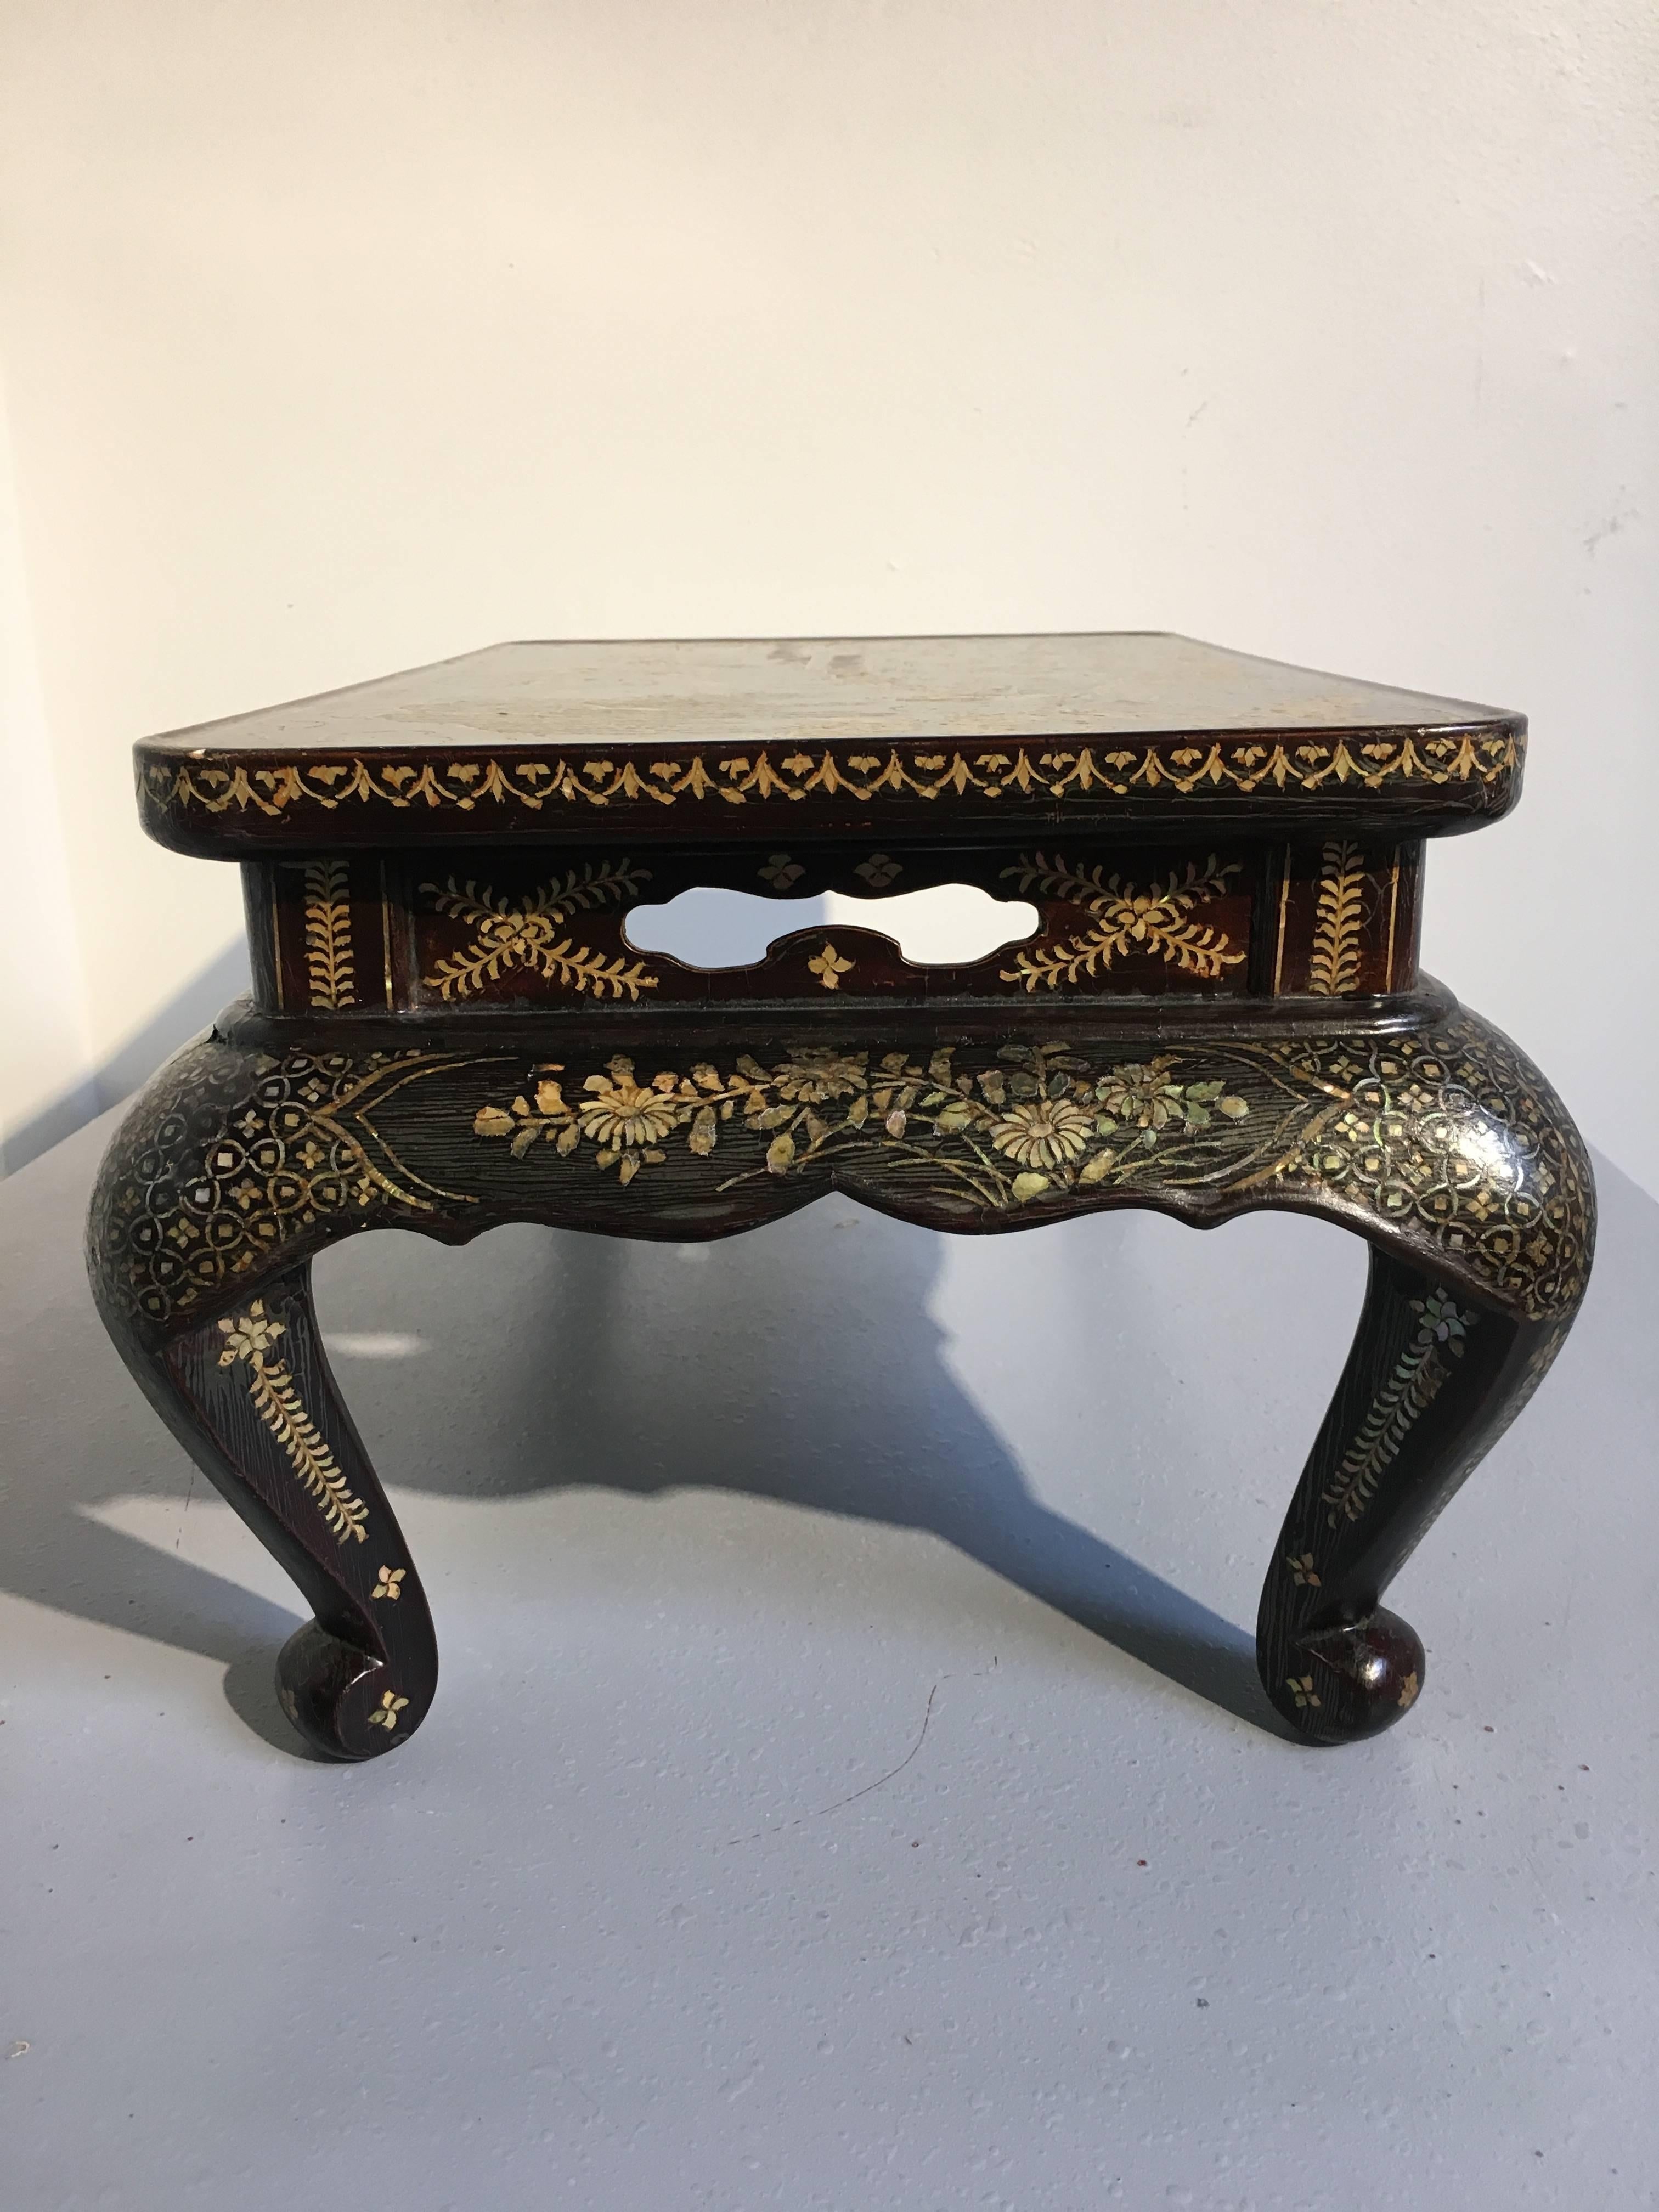 Qing Dynasty Chinese Lacquer and Mother-of-Pearl Small Table, 18th-19th Century 3